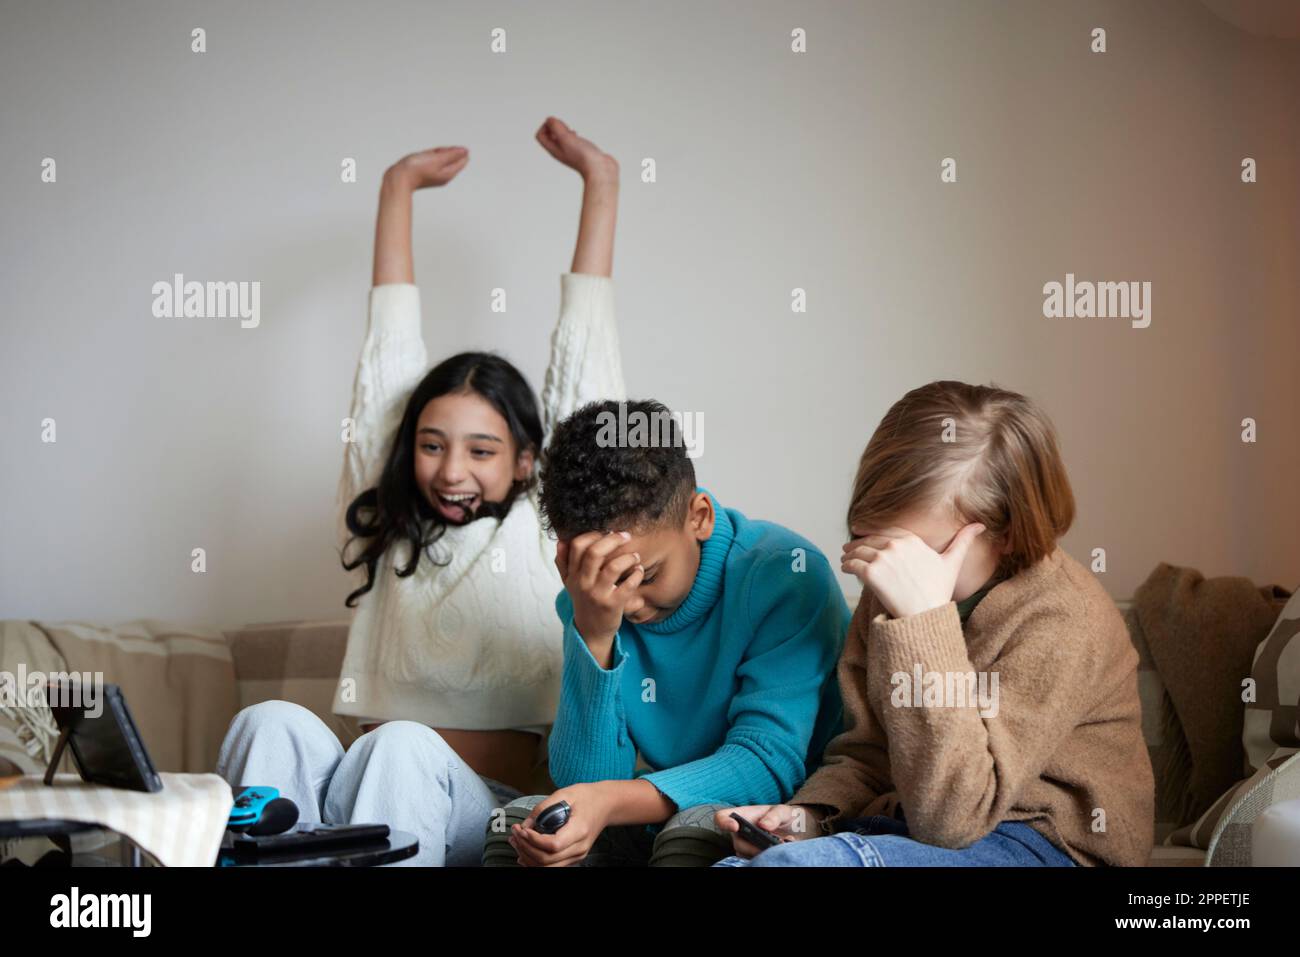 Children playing video games at home and celebrating Stock Photo